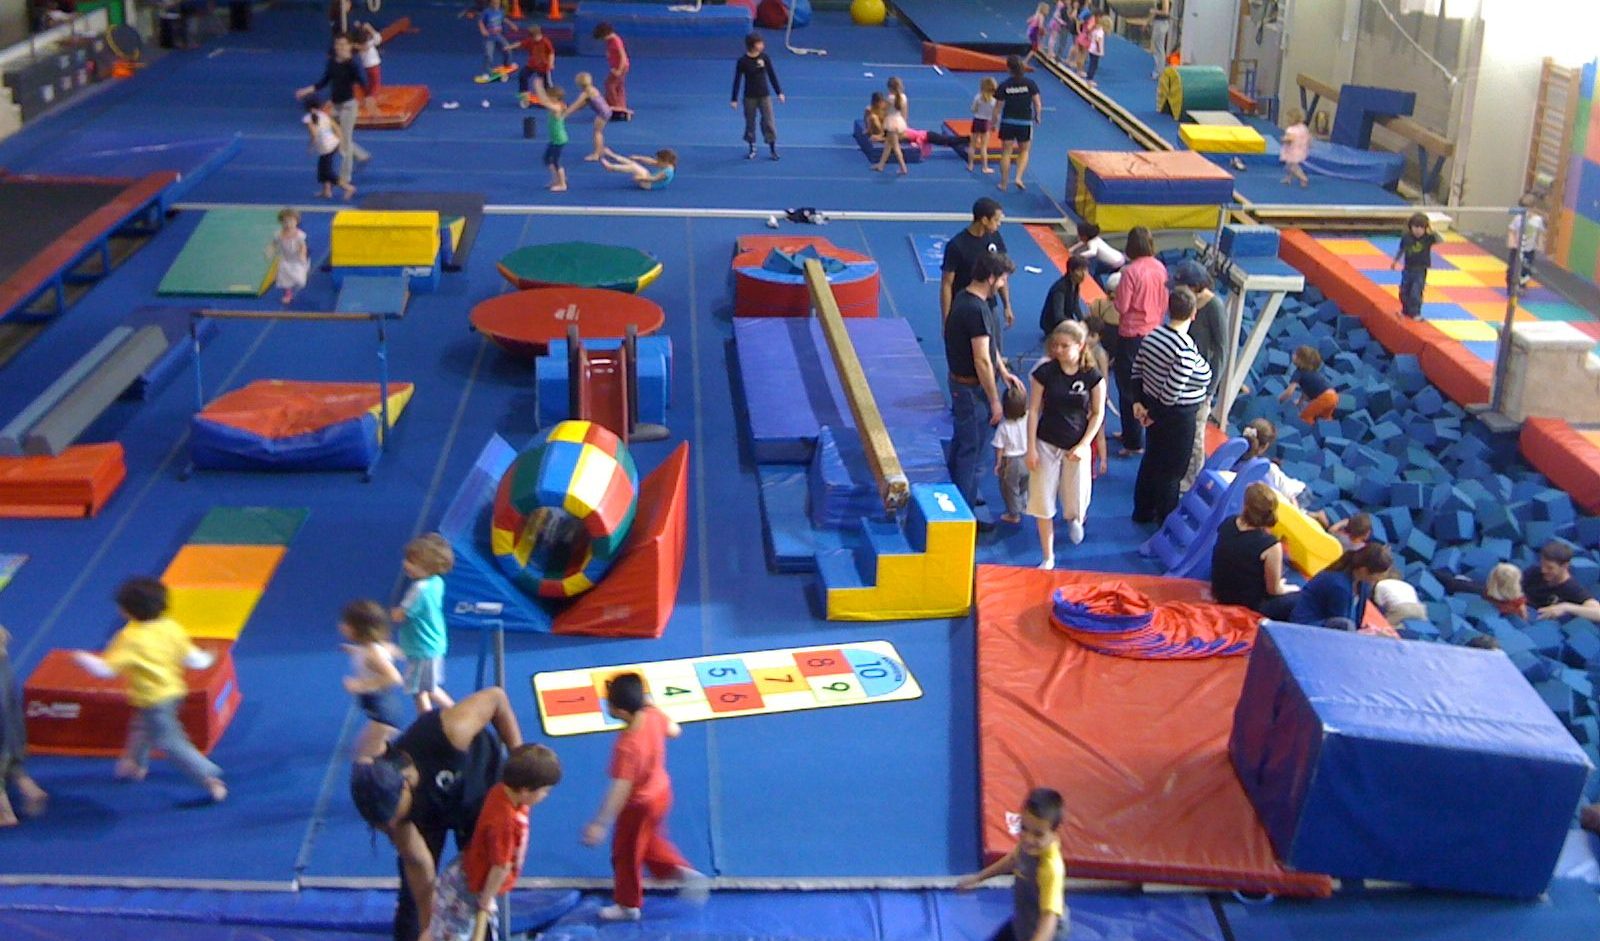 playspace for kids10 e1704913515414